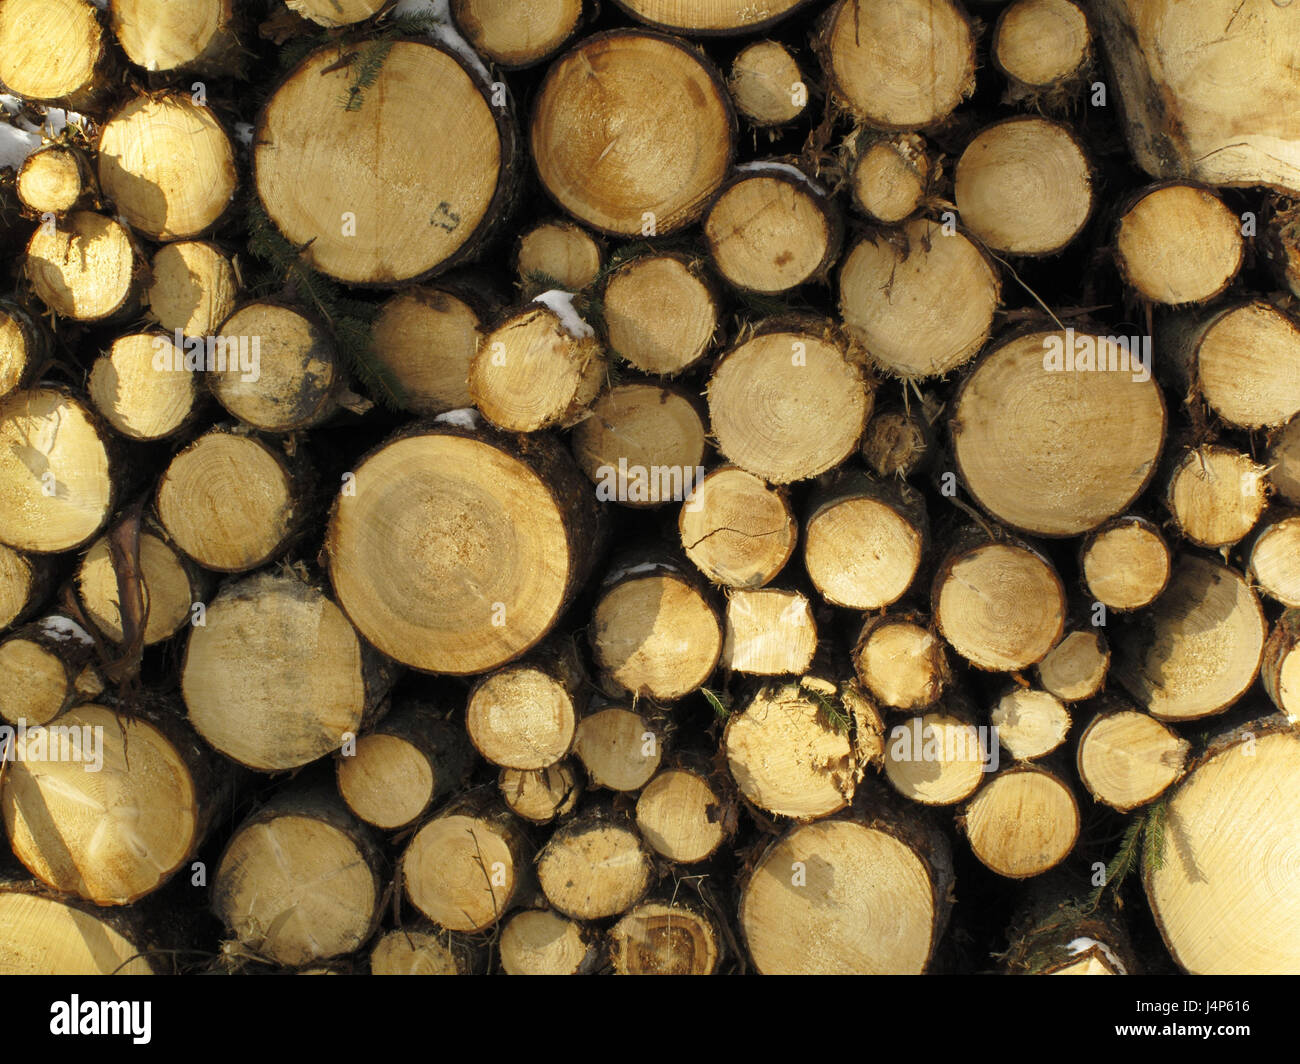 Pile of wood, trunks, detail, heap of impact, pines, trees, strains, firewood, woodwork, energy, fire woodwork, chimney woodwork, wooden batch, batch, raised, storage, drying, heating, heat, fuel, energy supplier, natural, raw material, renewable, growing again, Stock Photo